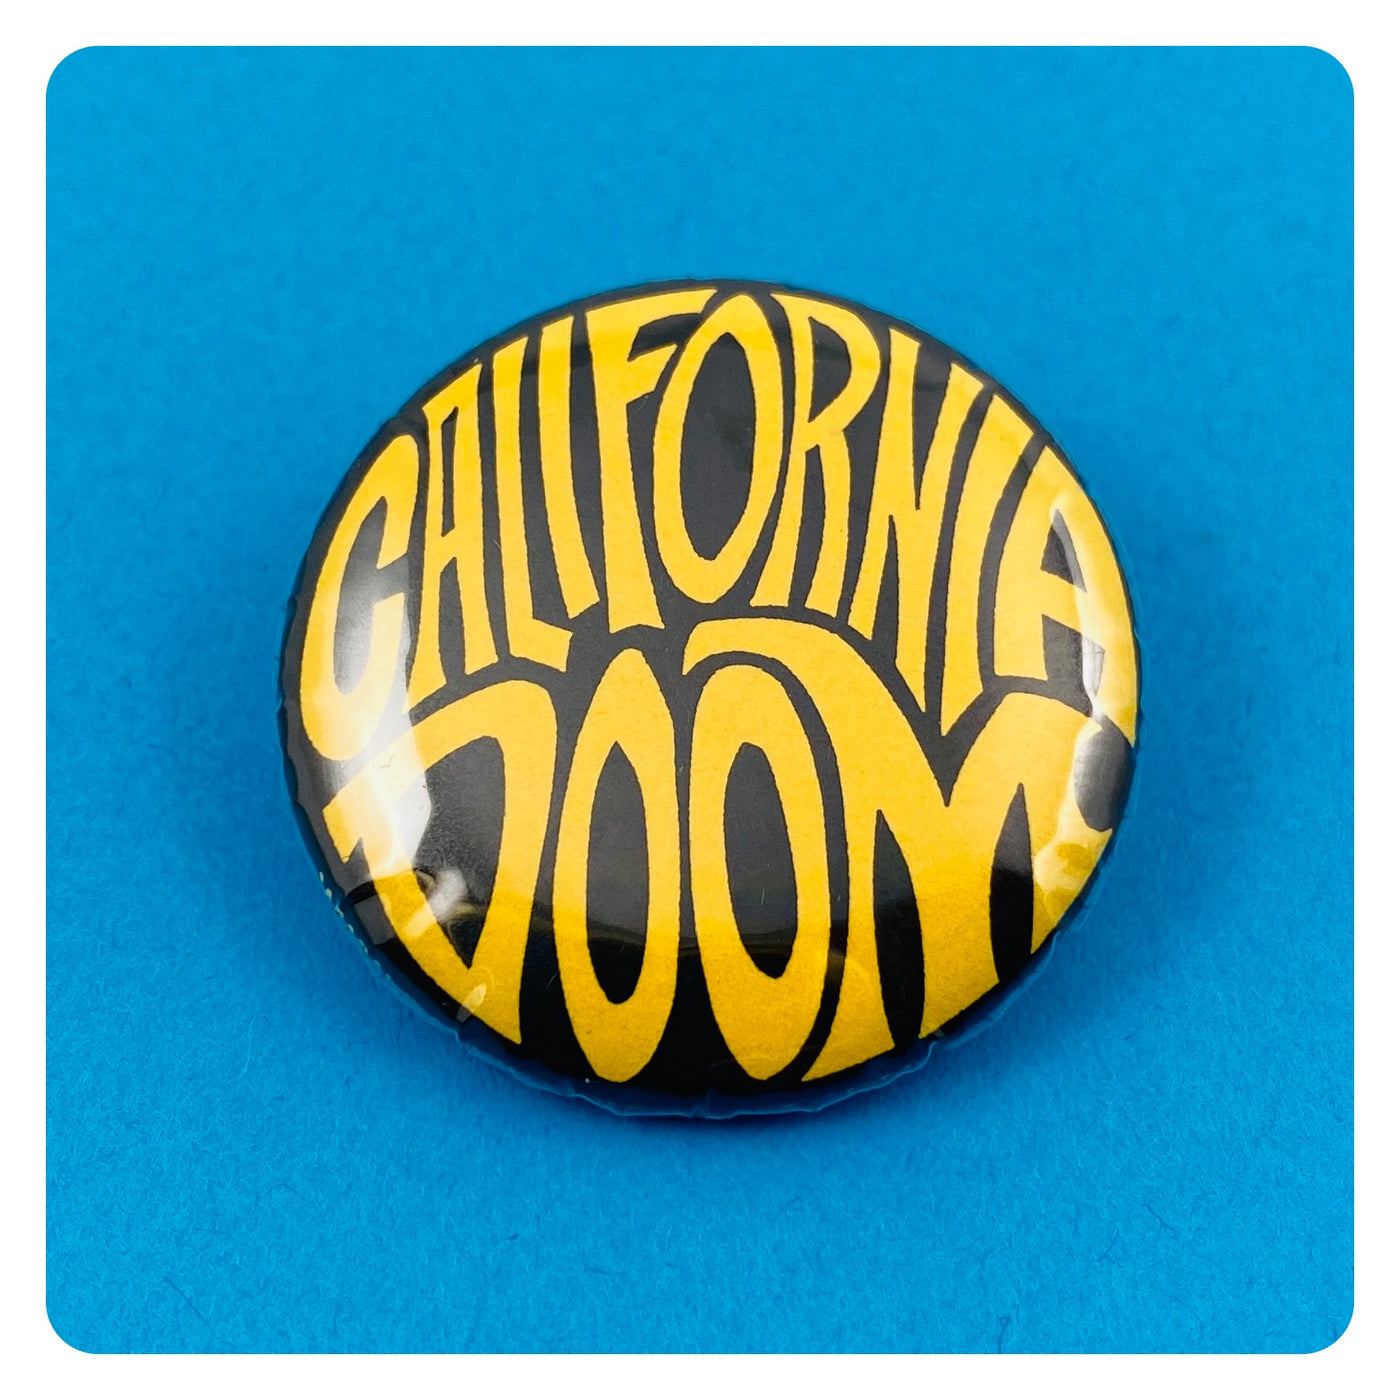 California Doom Hand Lettering Style Button